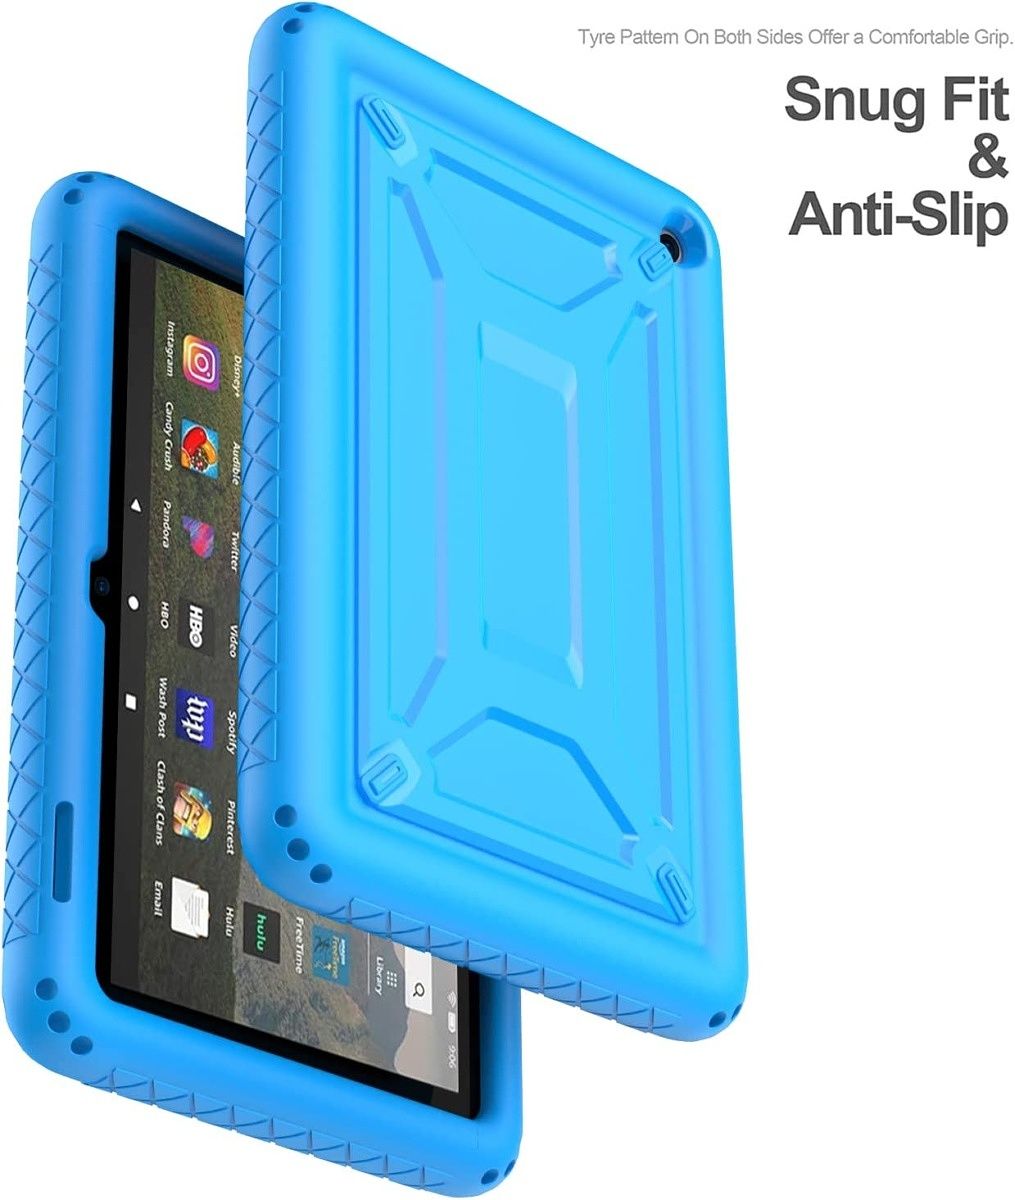 This is a kid-friendly case that offers tough drop protection and comes in a variety of colors.  It has four insulating air holes on each corner, shock-absorbing silicone material, and textured sides for better grip.  It also has a raised lip to protect the screen. 